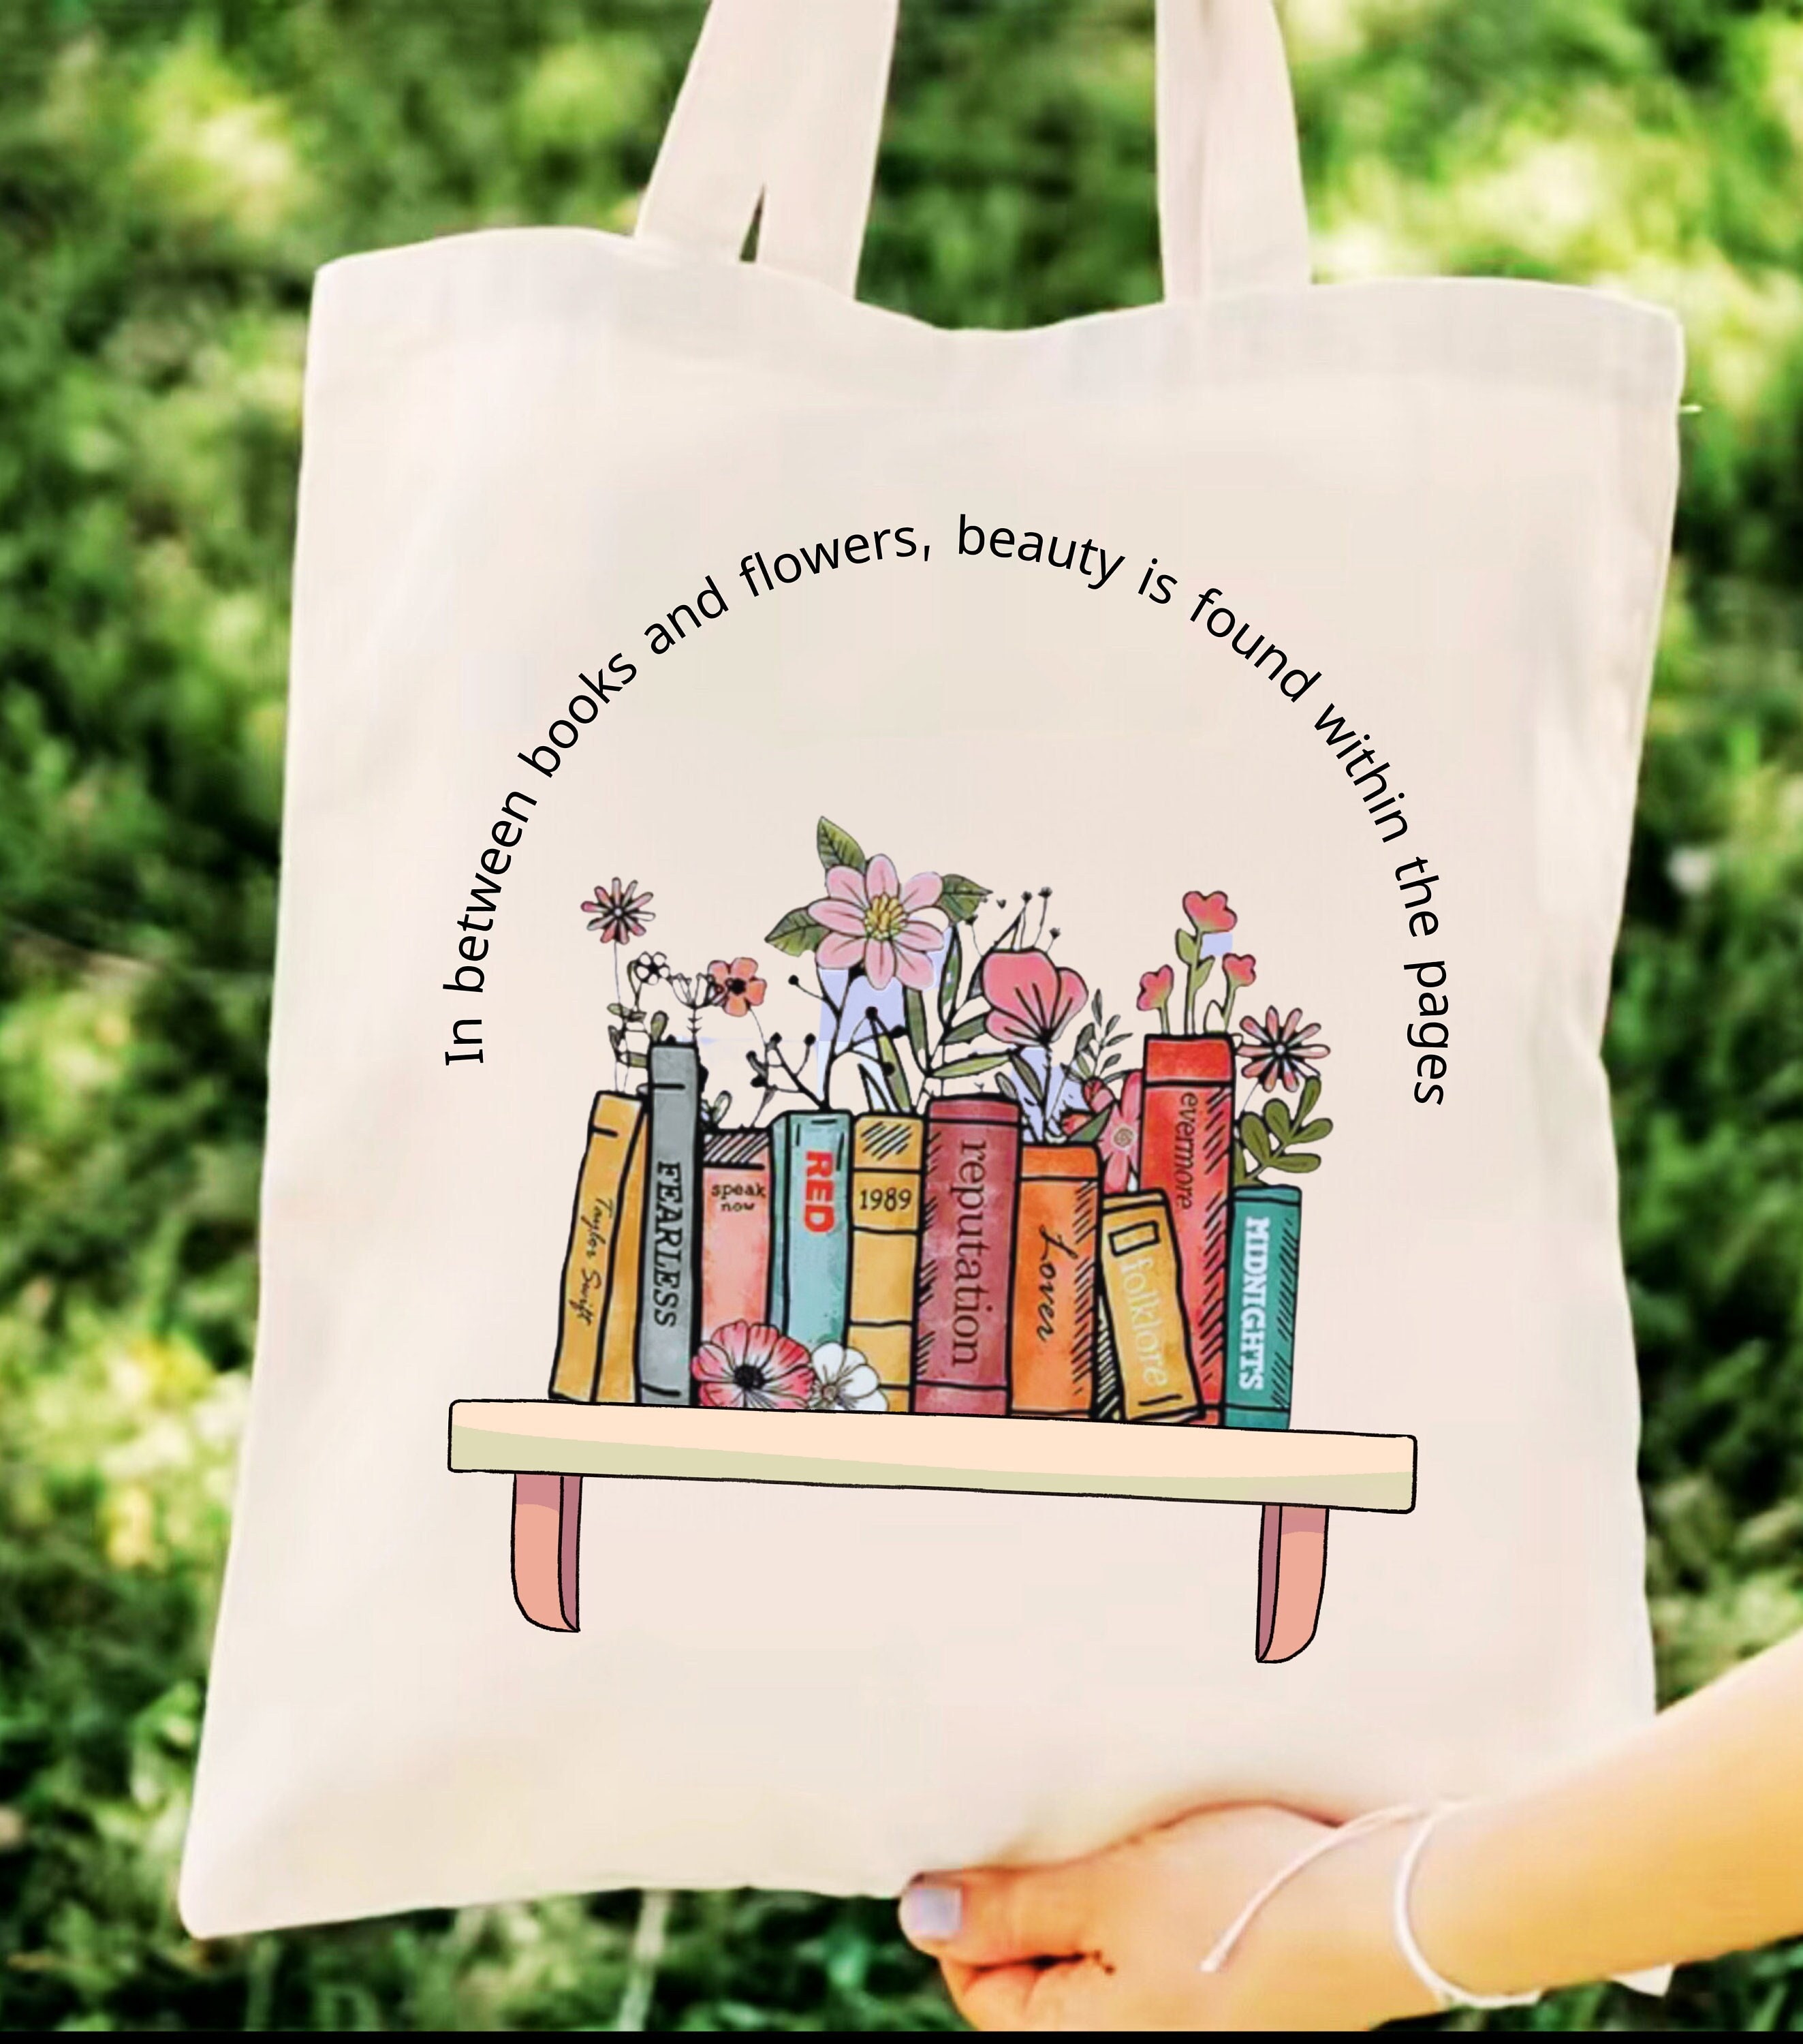 CLEARANCE - Books are Magic Tote Bag, Gift For Reader, Book Tote Bag,  Library Bag, Grocery Bag, Gift to Her, Book Lover, Farmers Tote Bag